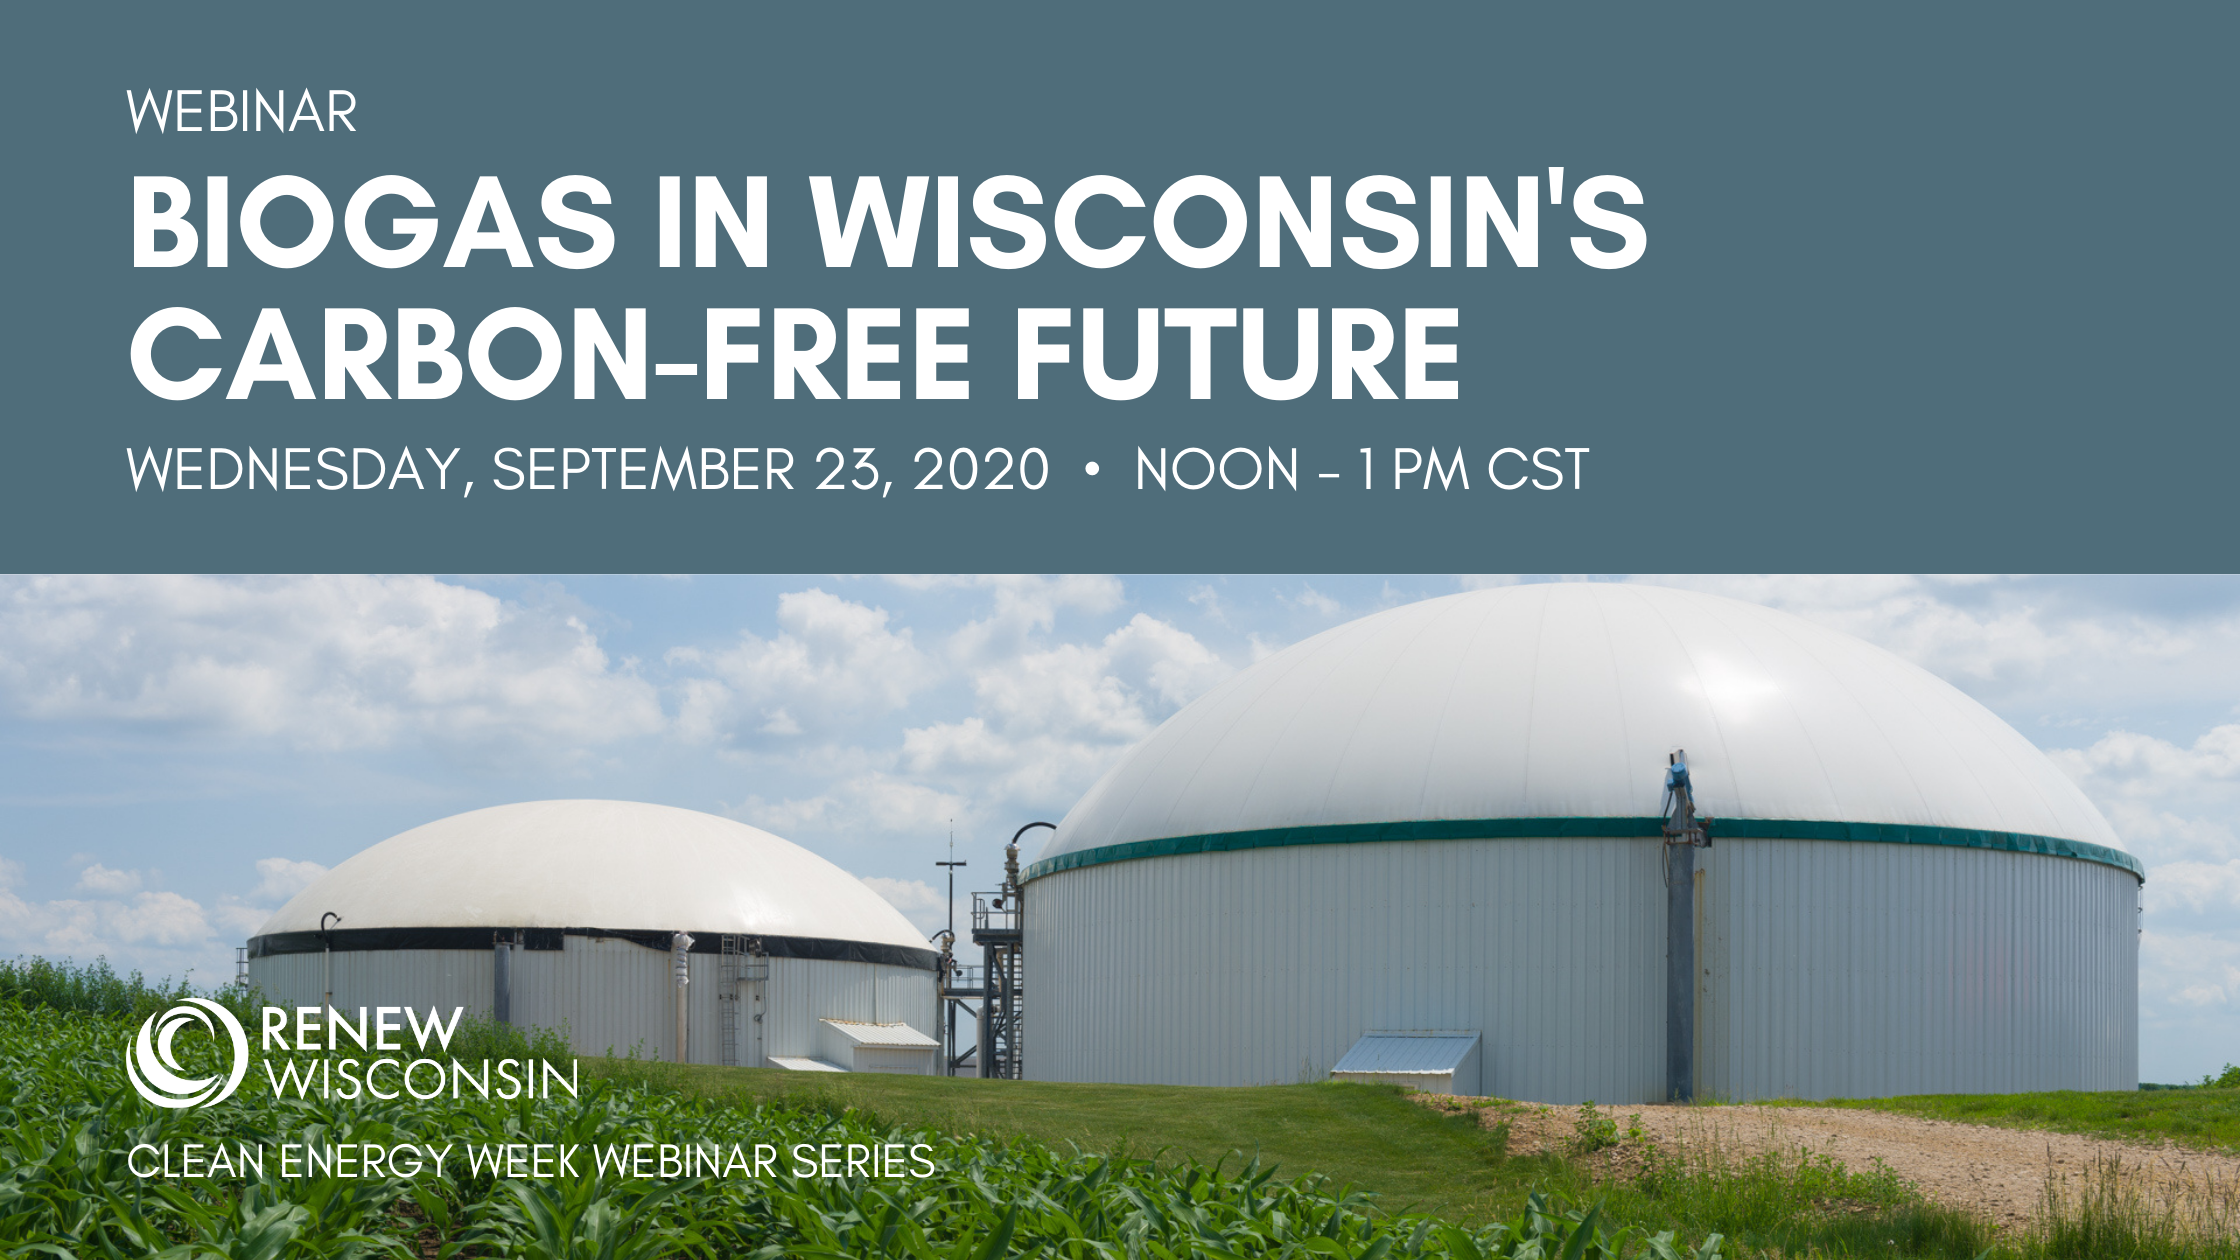 Banner image for biogas webinar showing a biogas facility.